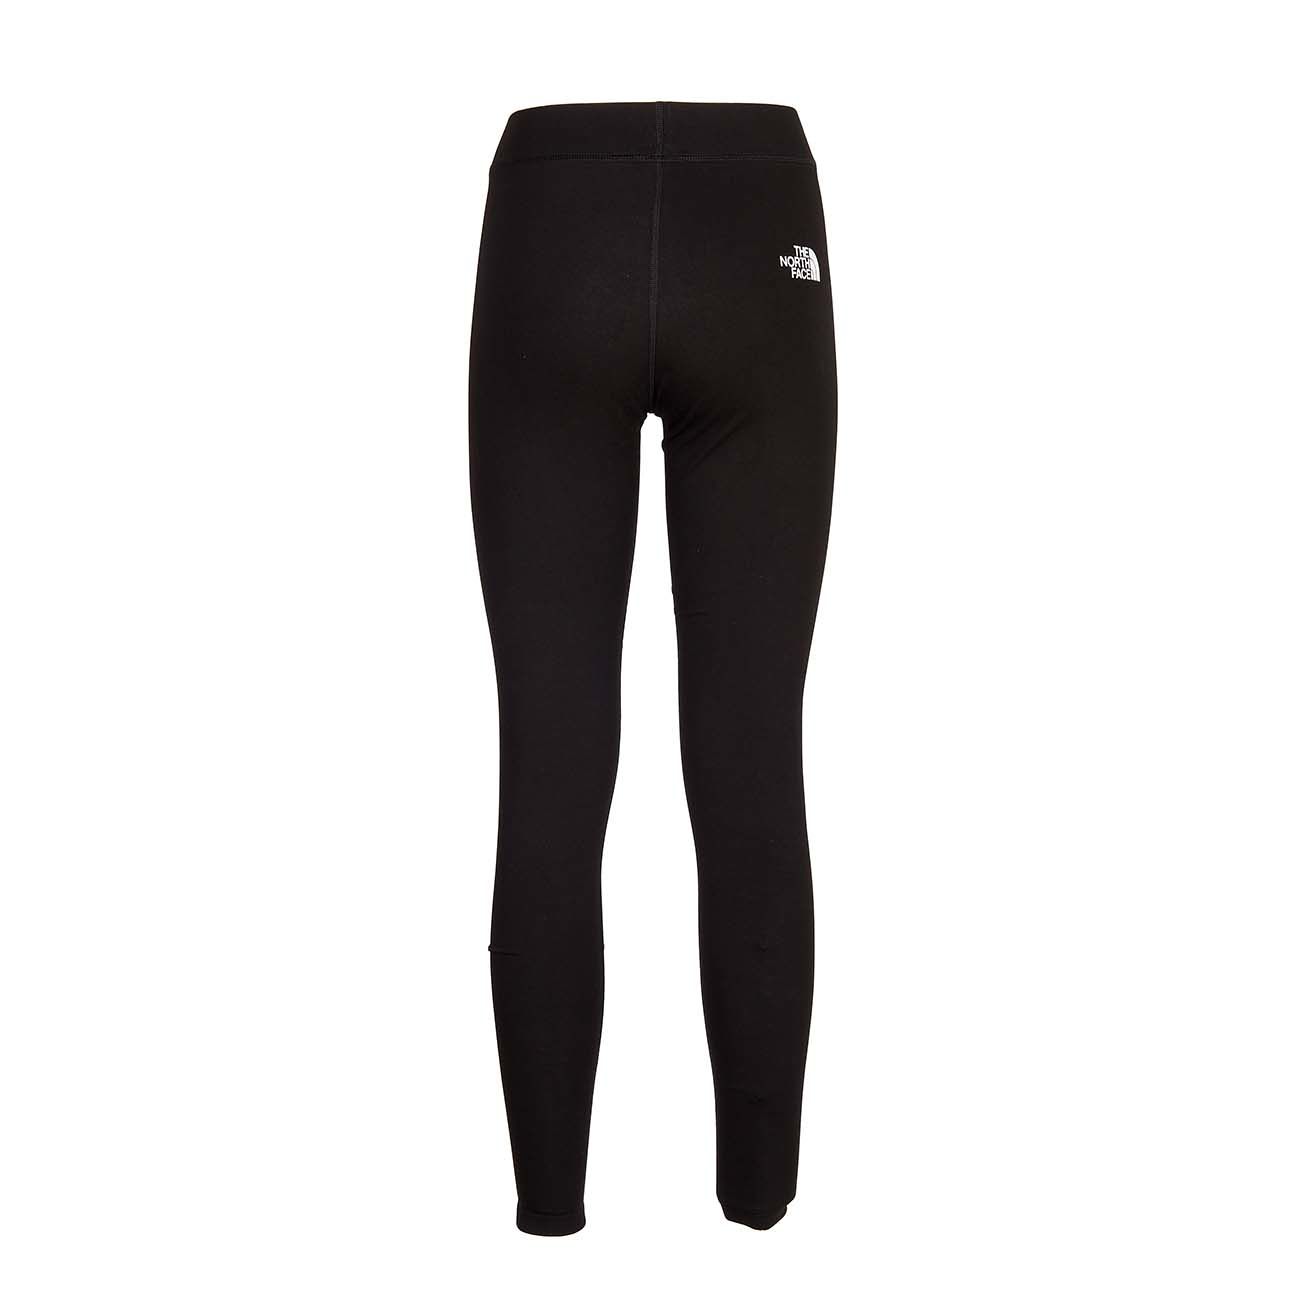 STRETCH LEGGINGS WITH SMALL PRINTED LOGO Woman Black 2013037409492